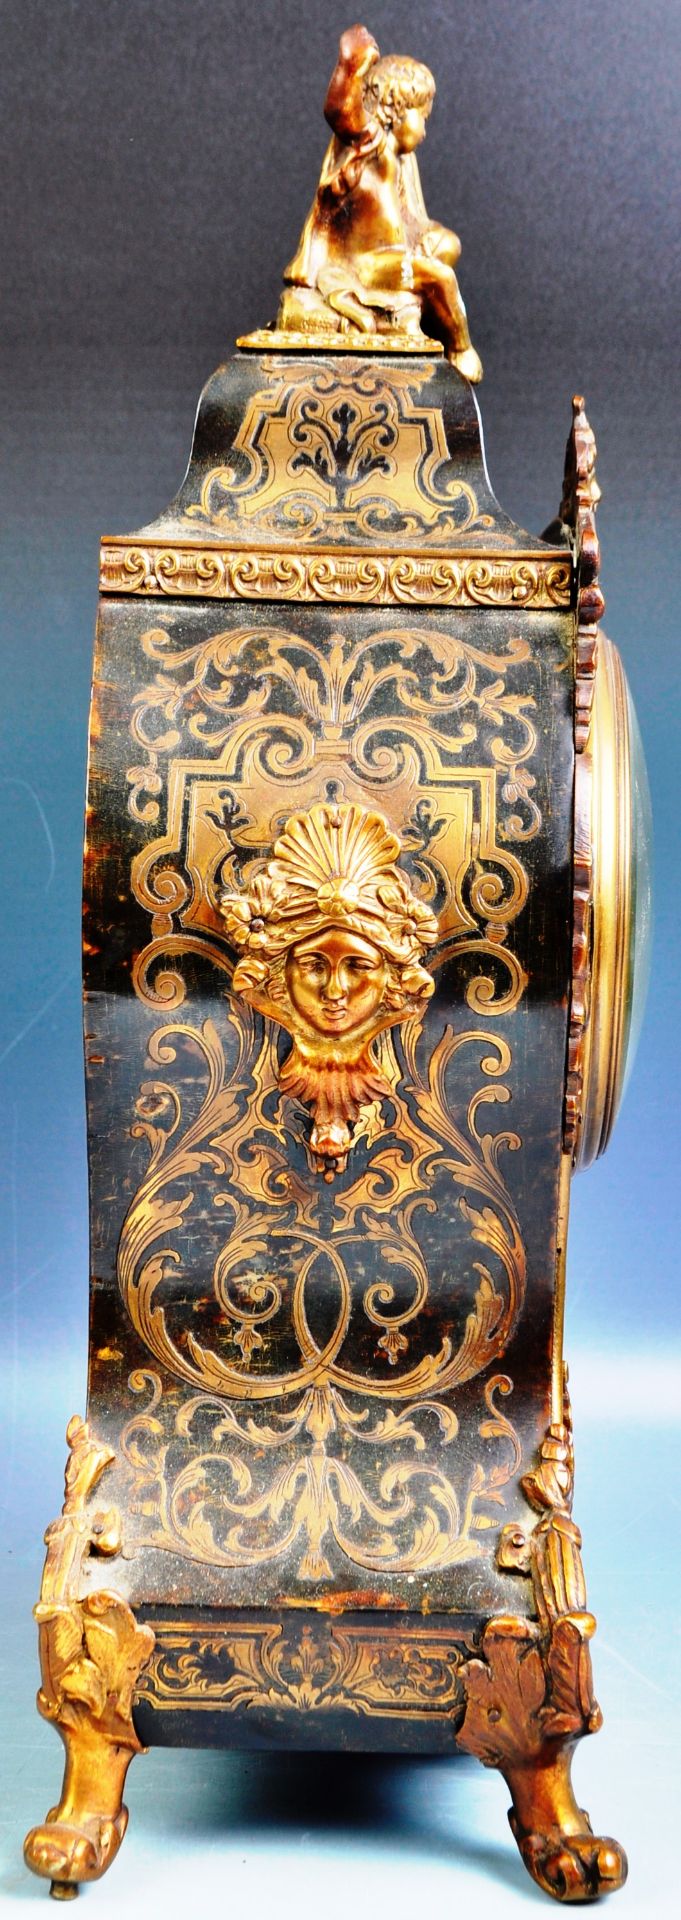 STRIKING FRENCH 19TH CENTURY BOULLE WORK TABLE CLOCK - Image 2 of 9